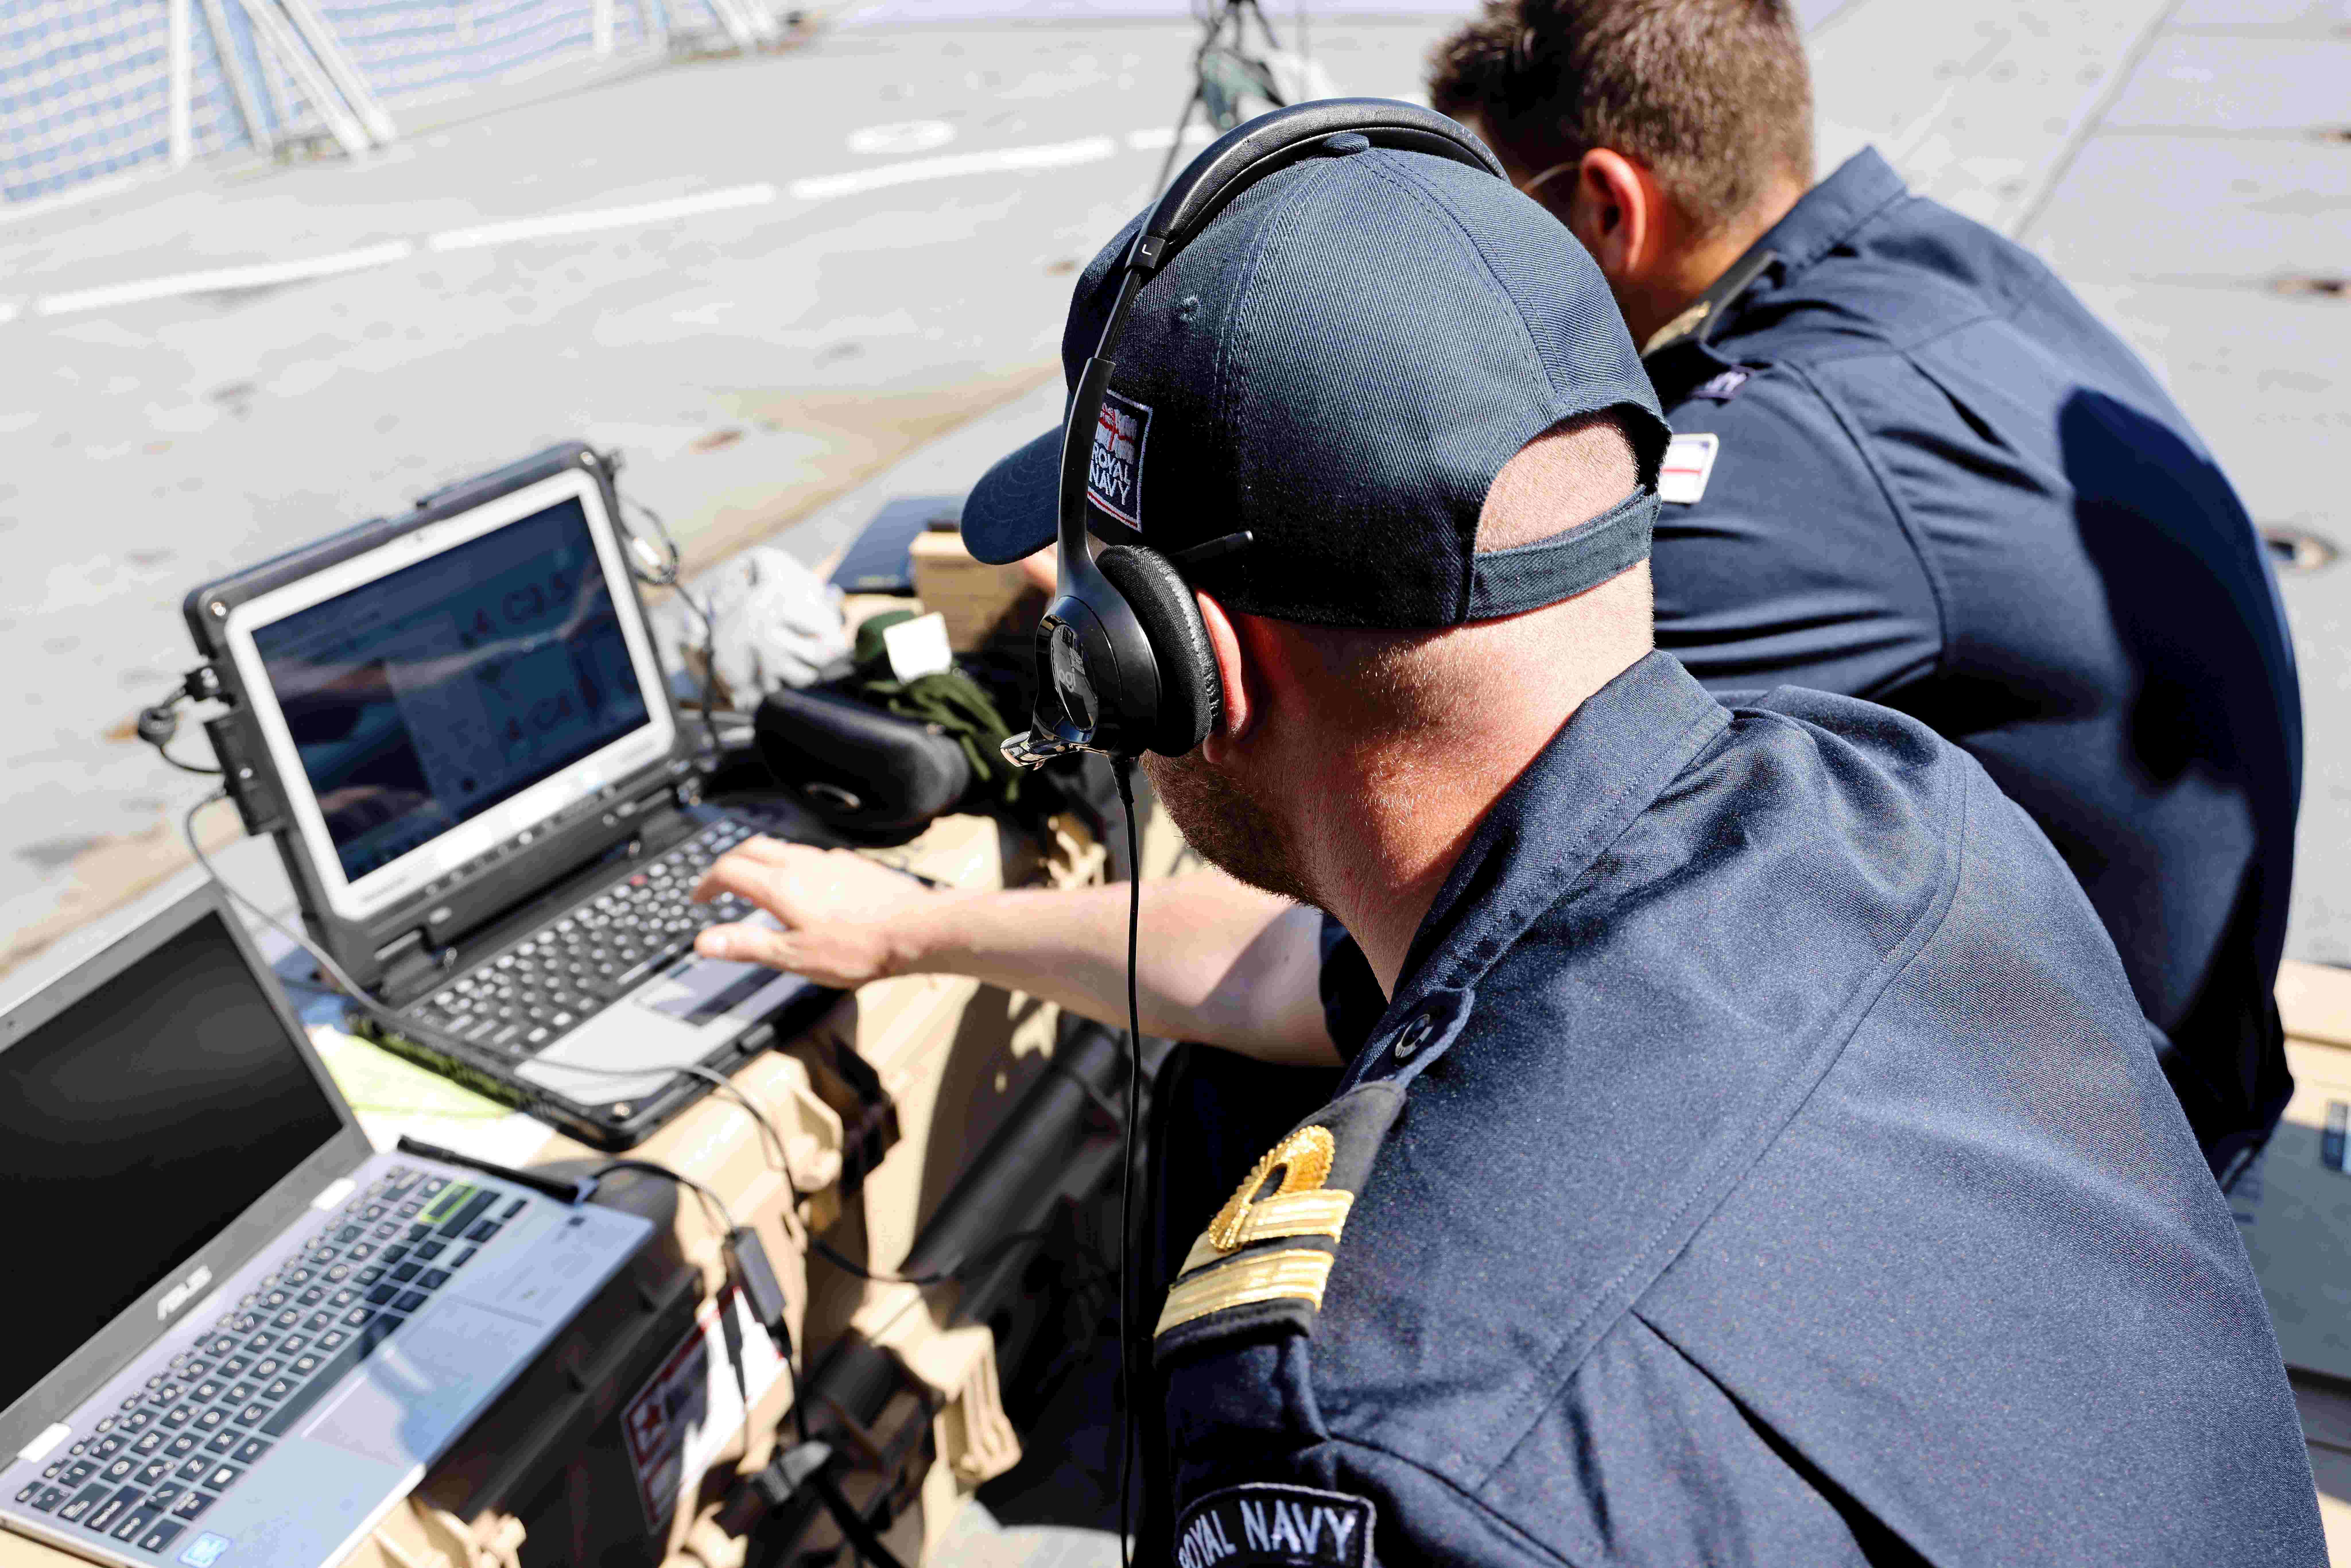 Two Royal Navy Officers on deck of ship, sat at computers with headsets on and in blue uniforms